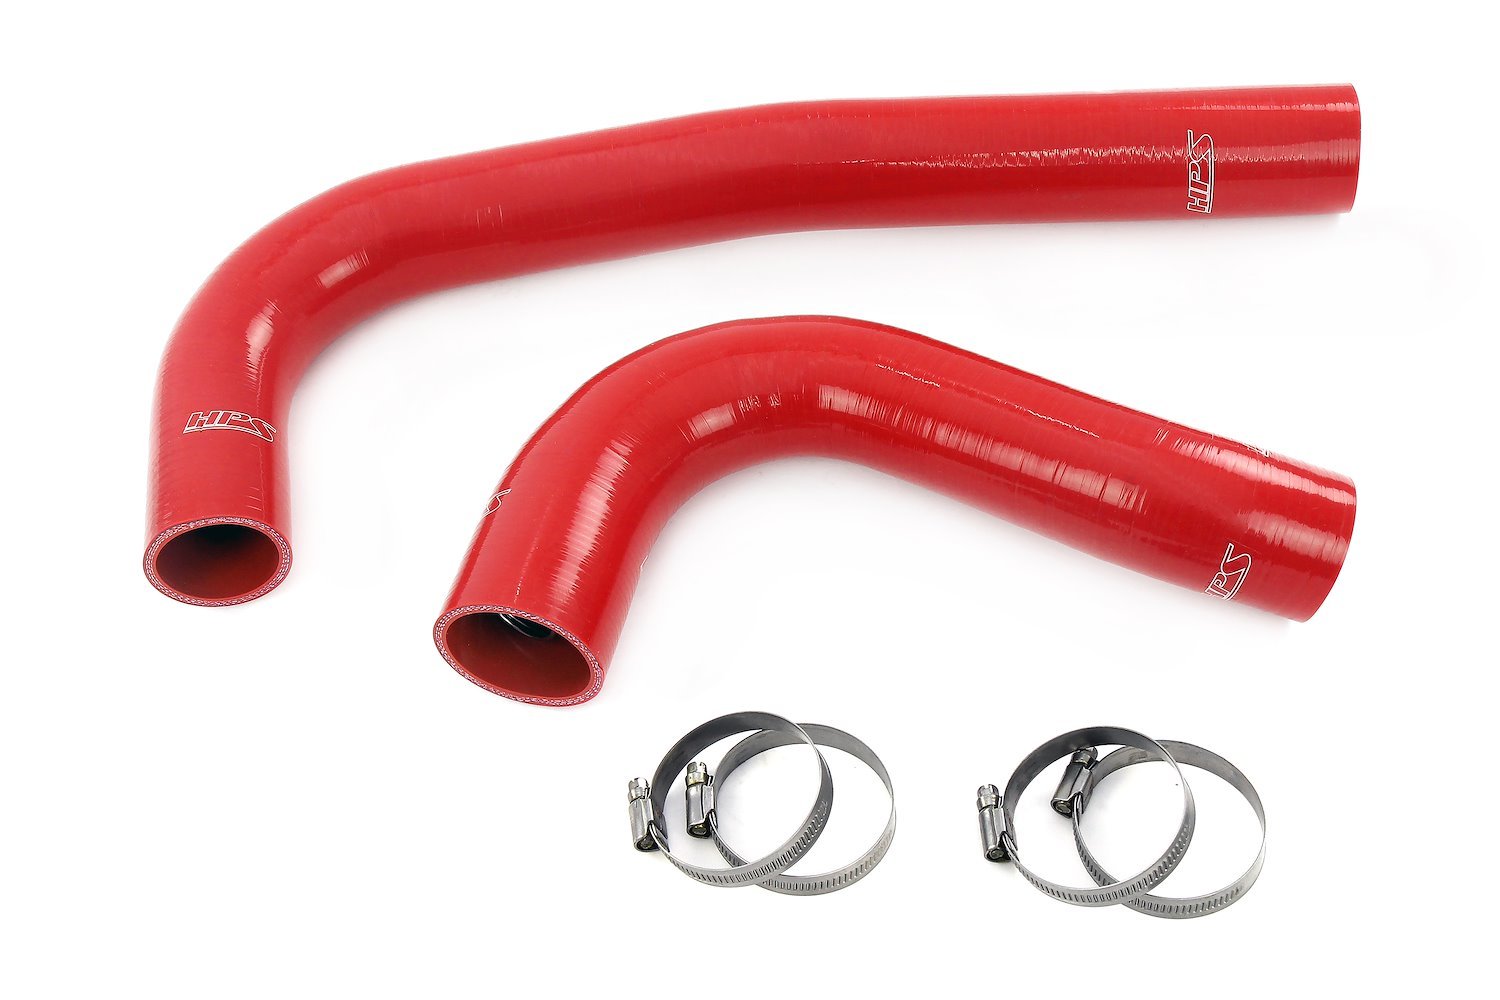 57-1308-RED Radiator Hose Kit, 3-Ply Reinforced Silicone, Replaces Rubber Radiator Coolant Hoses